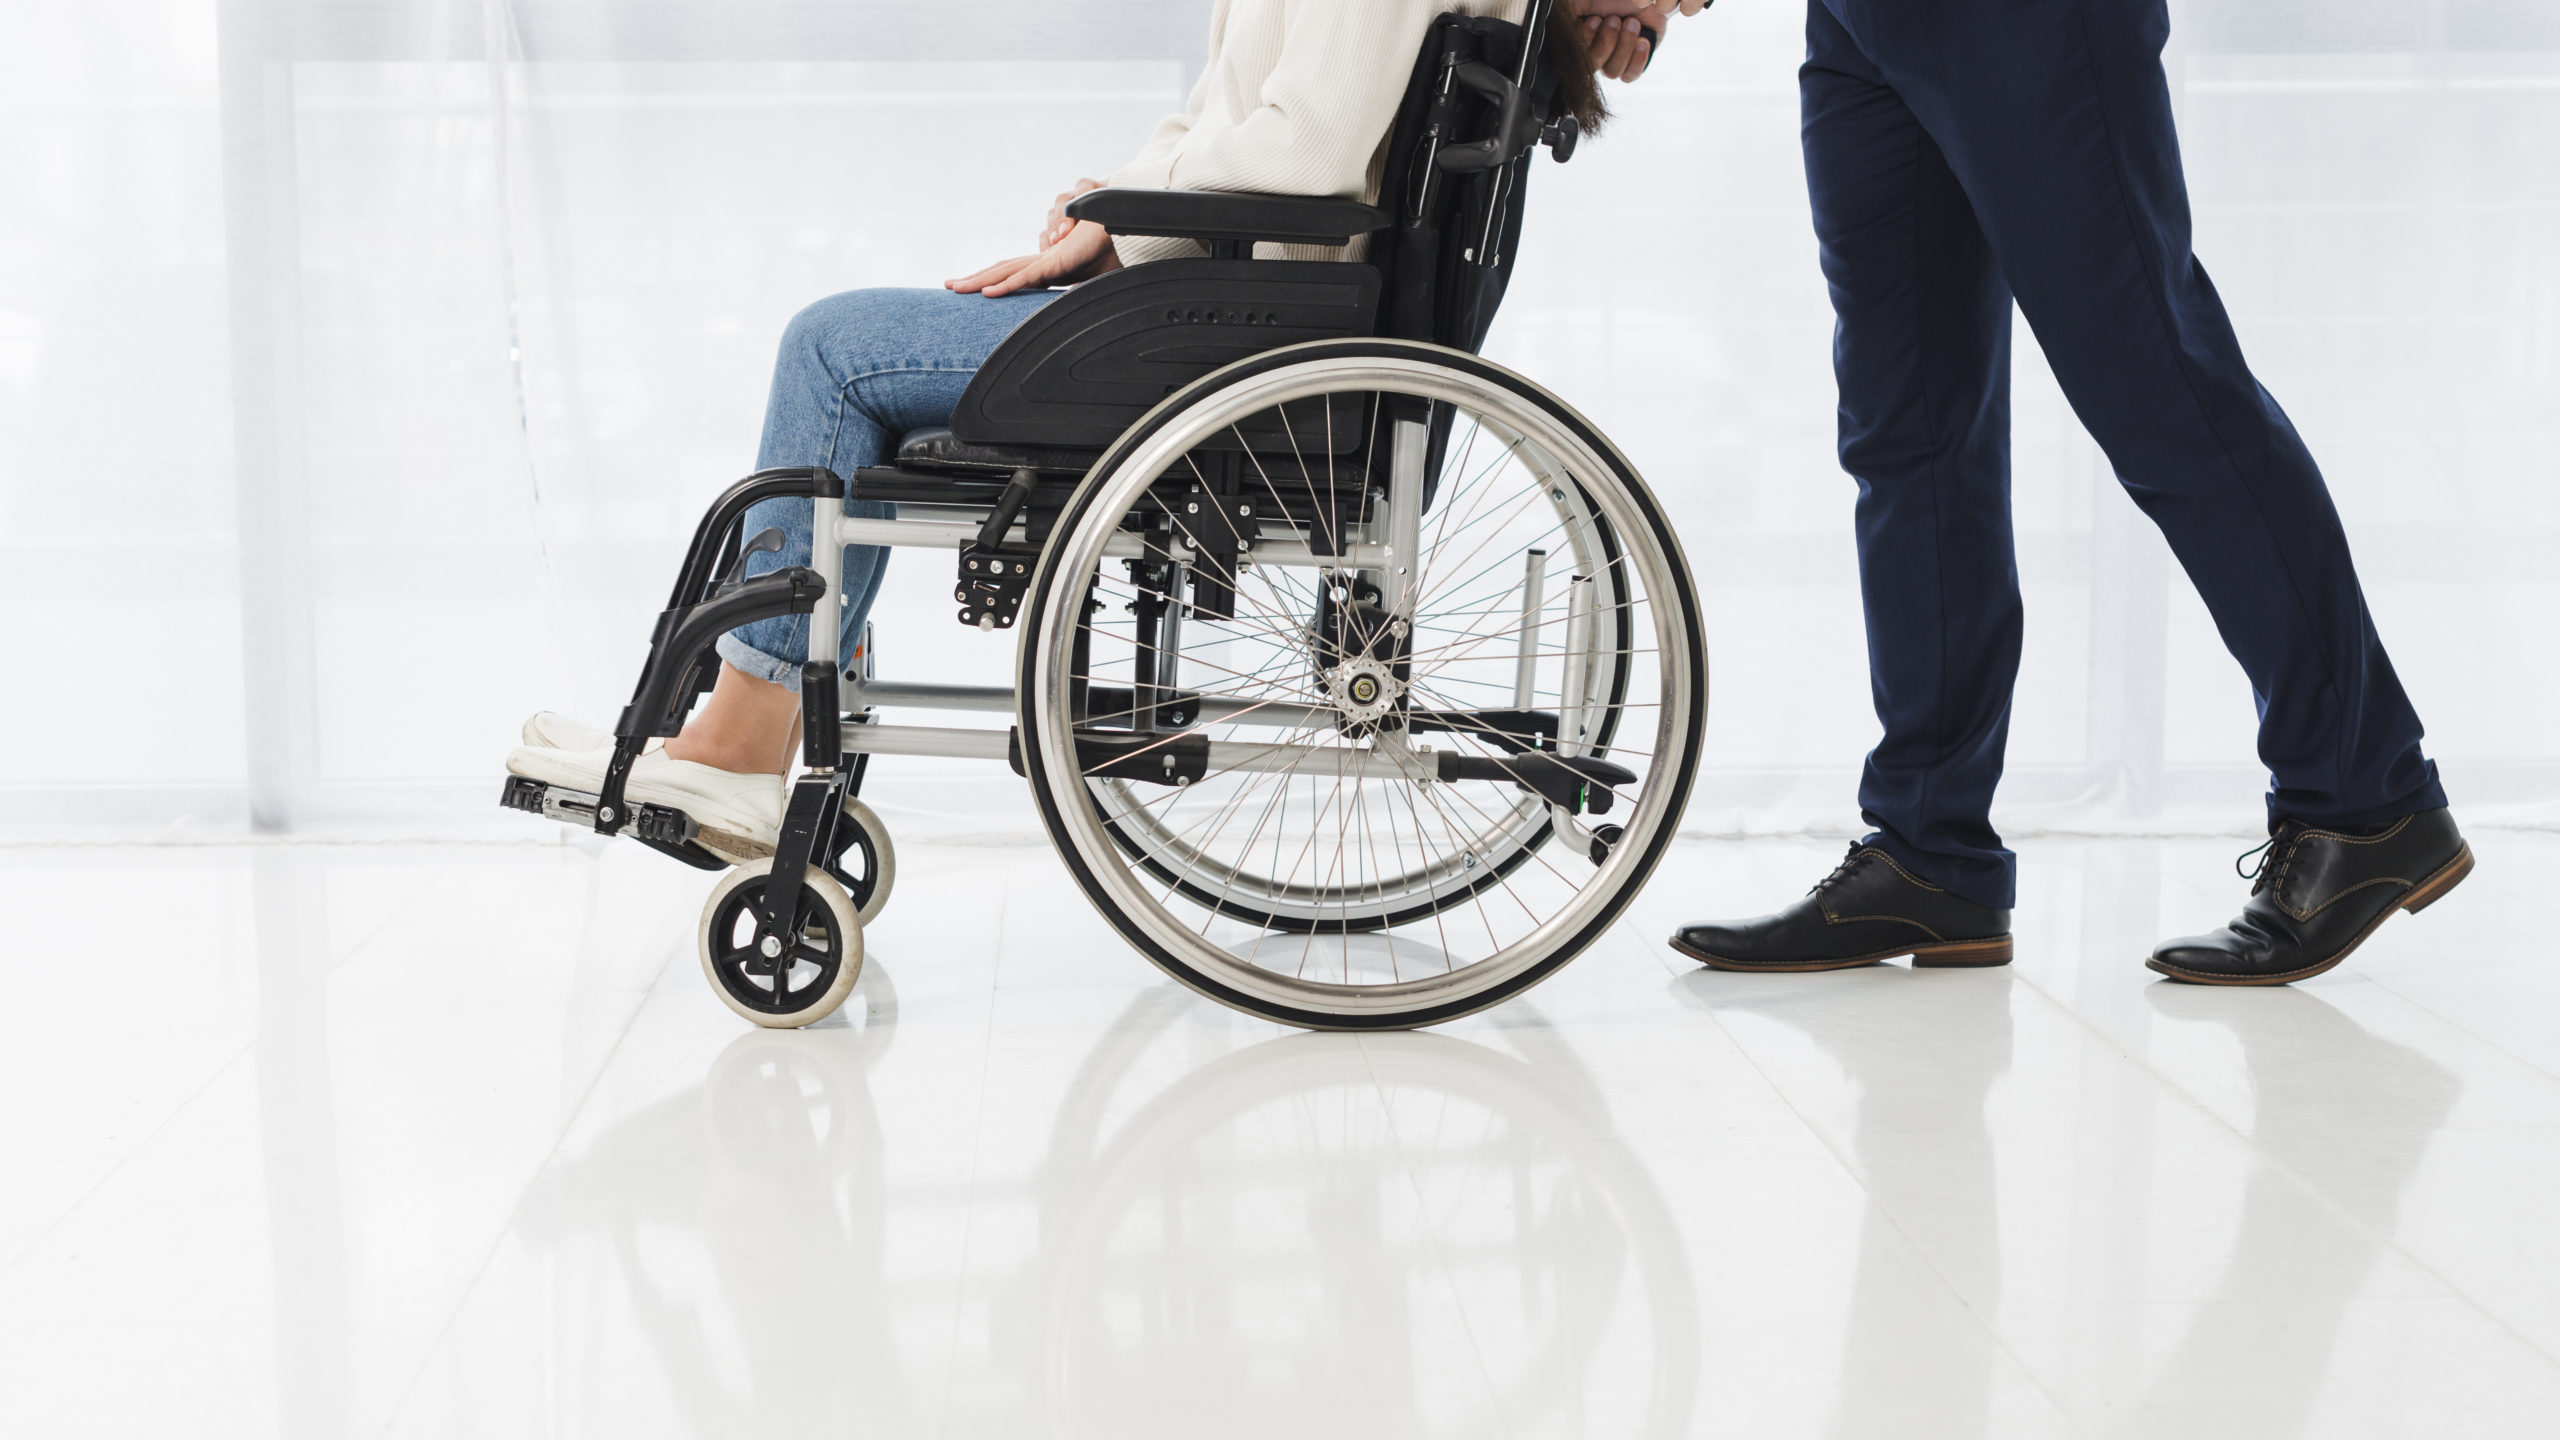 A Patient on a Wheel Chair pushed by a Person